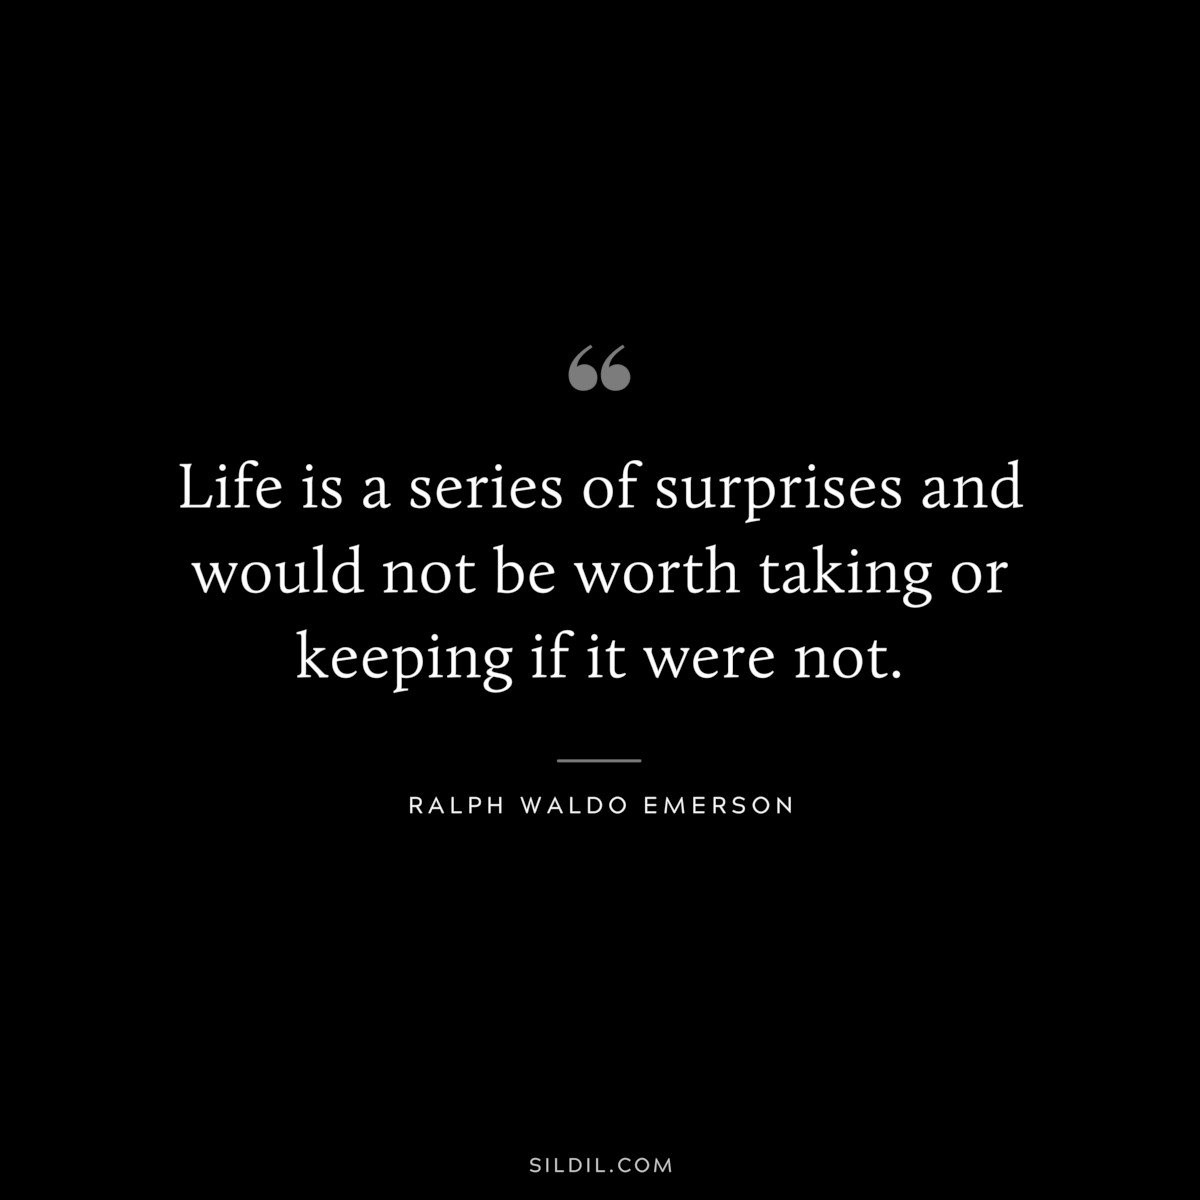 Life is a series of surprises and would not be worth taking or keeping if it were not. — Ralph Waldo Emerson